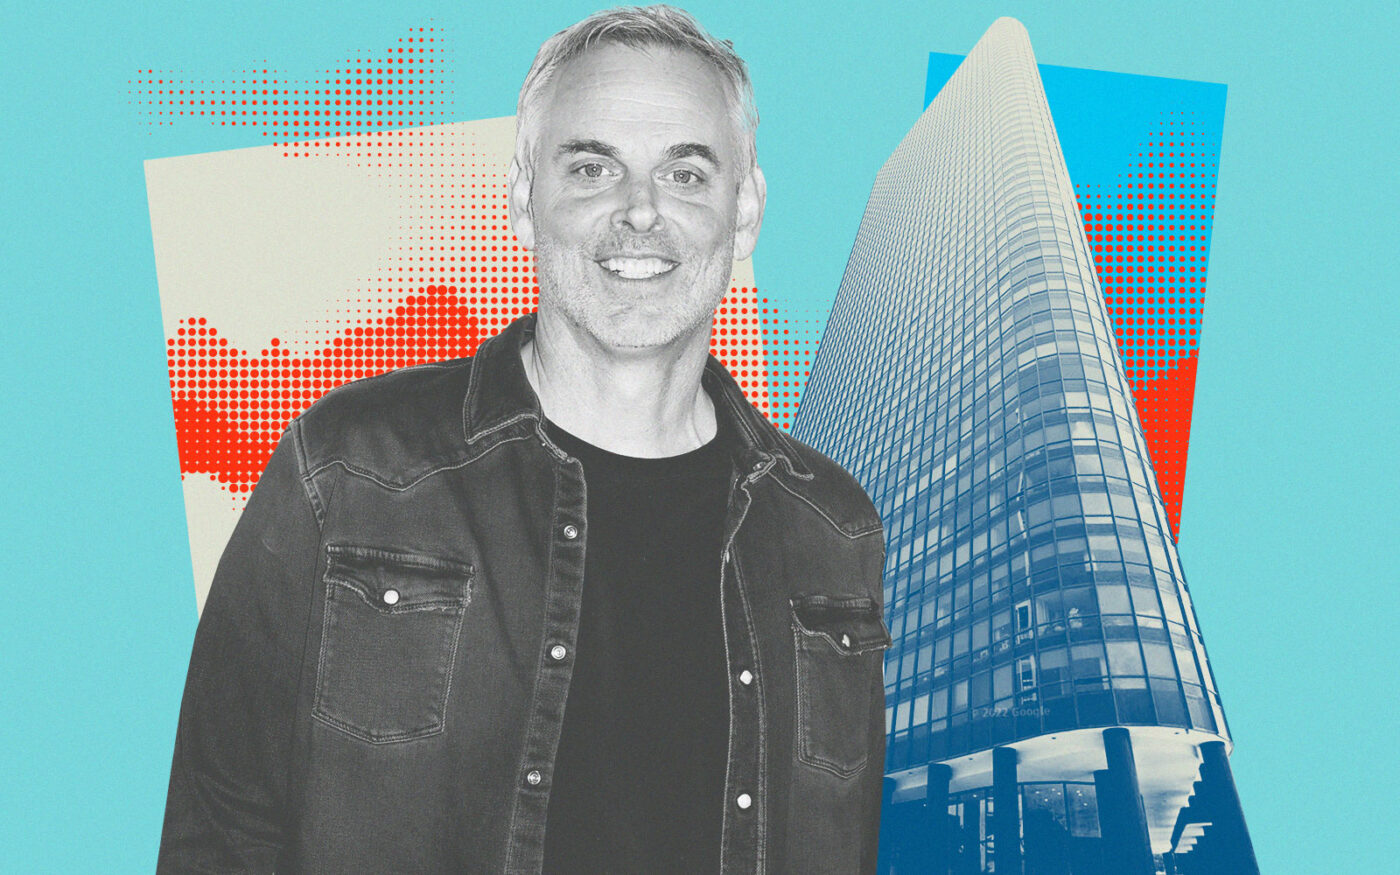 Colin Cowherd Pays $3.3M for Condo in Ritzy Chicago Tower